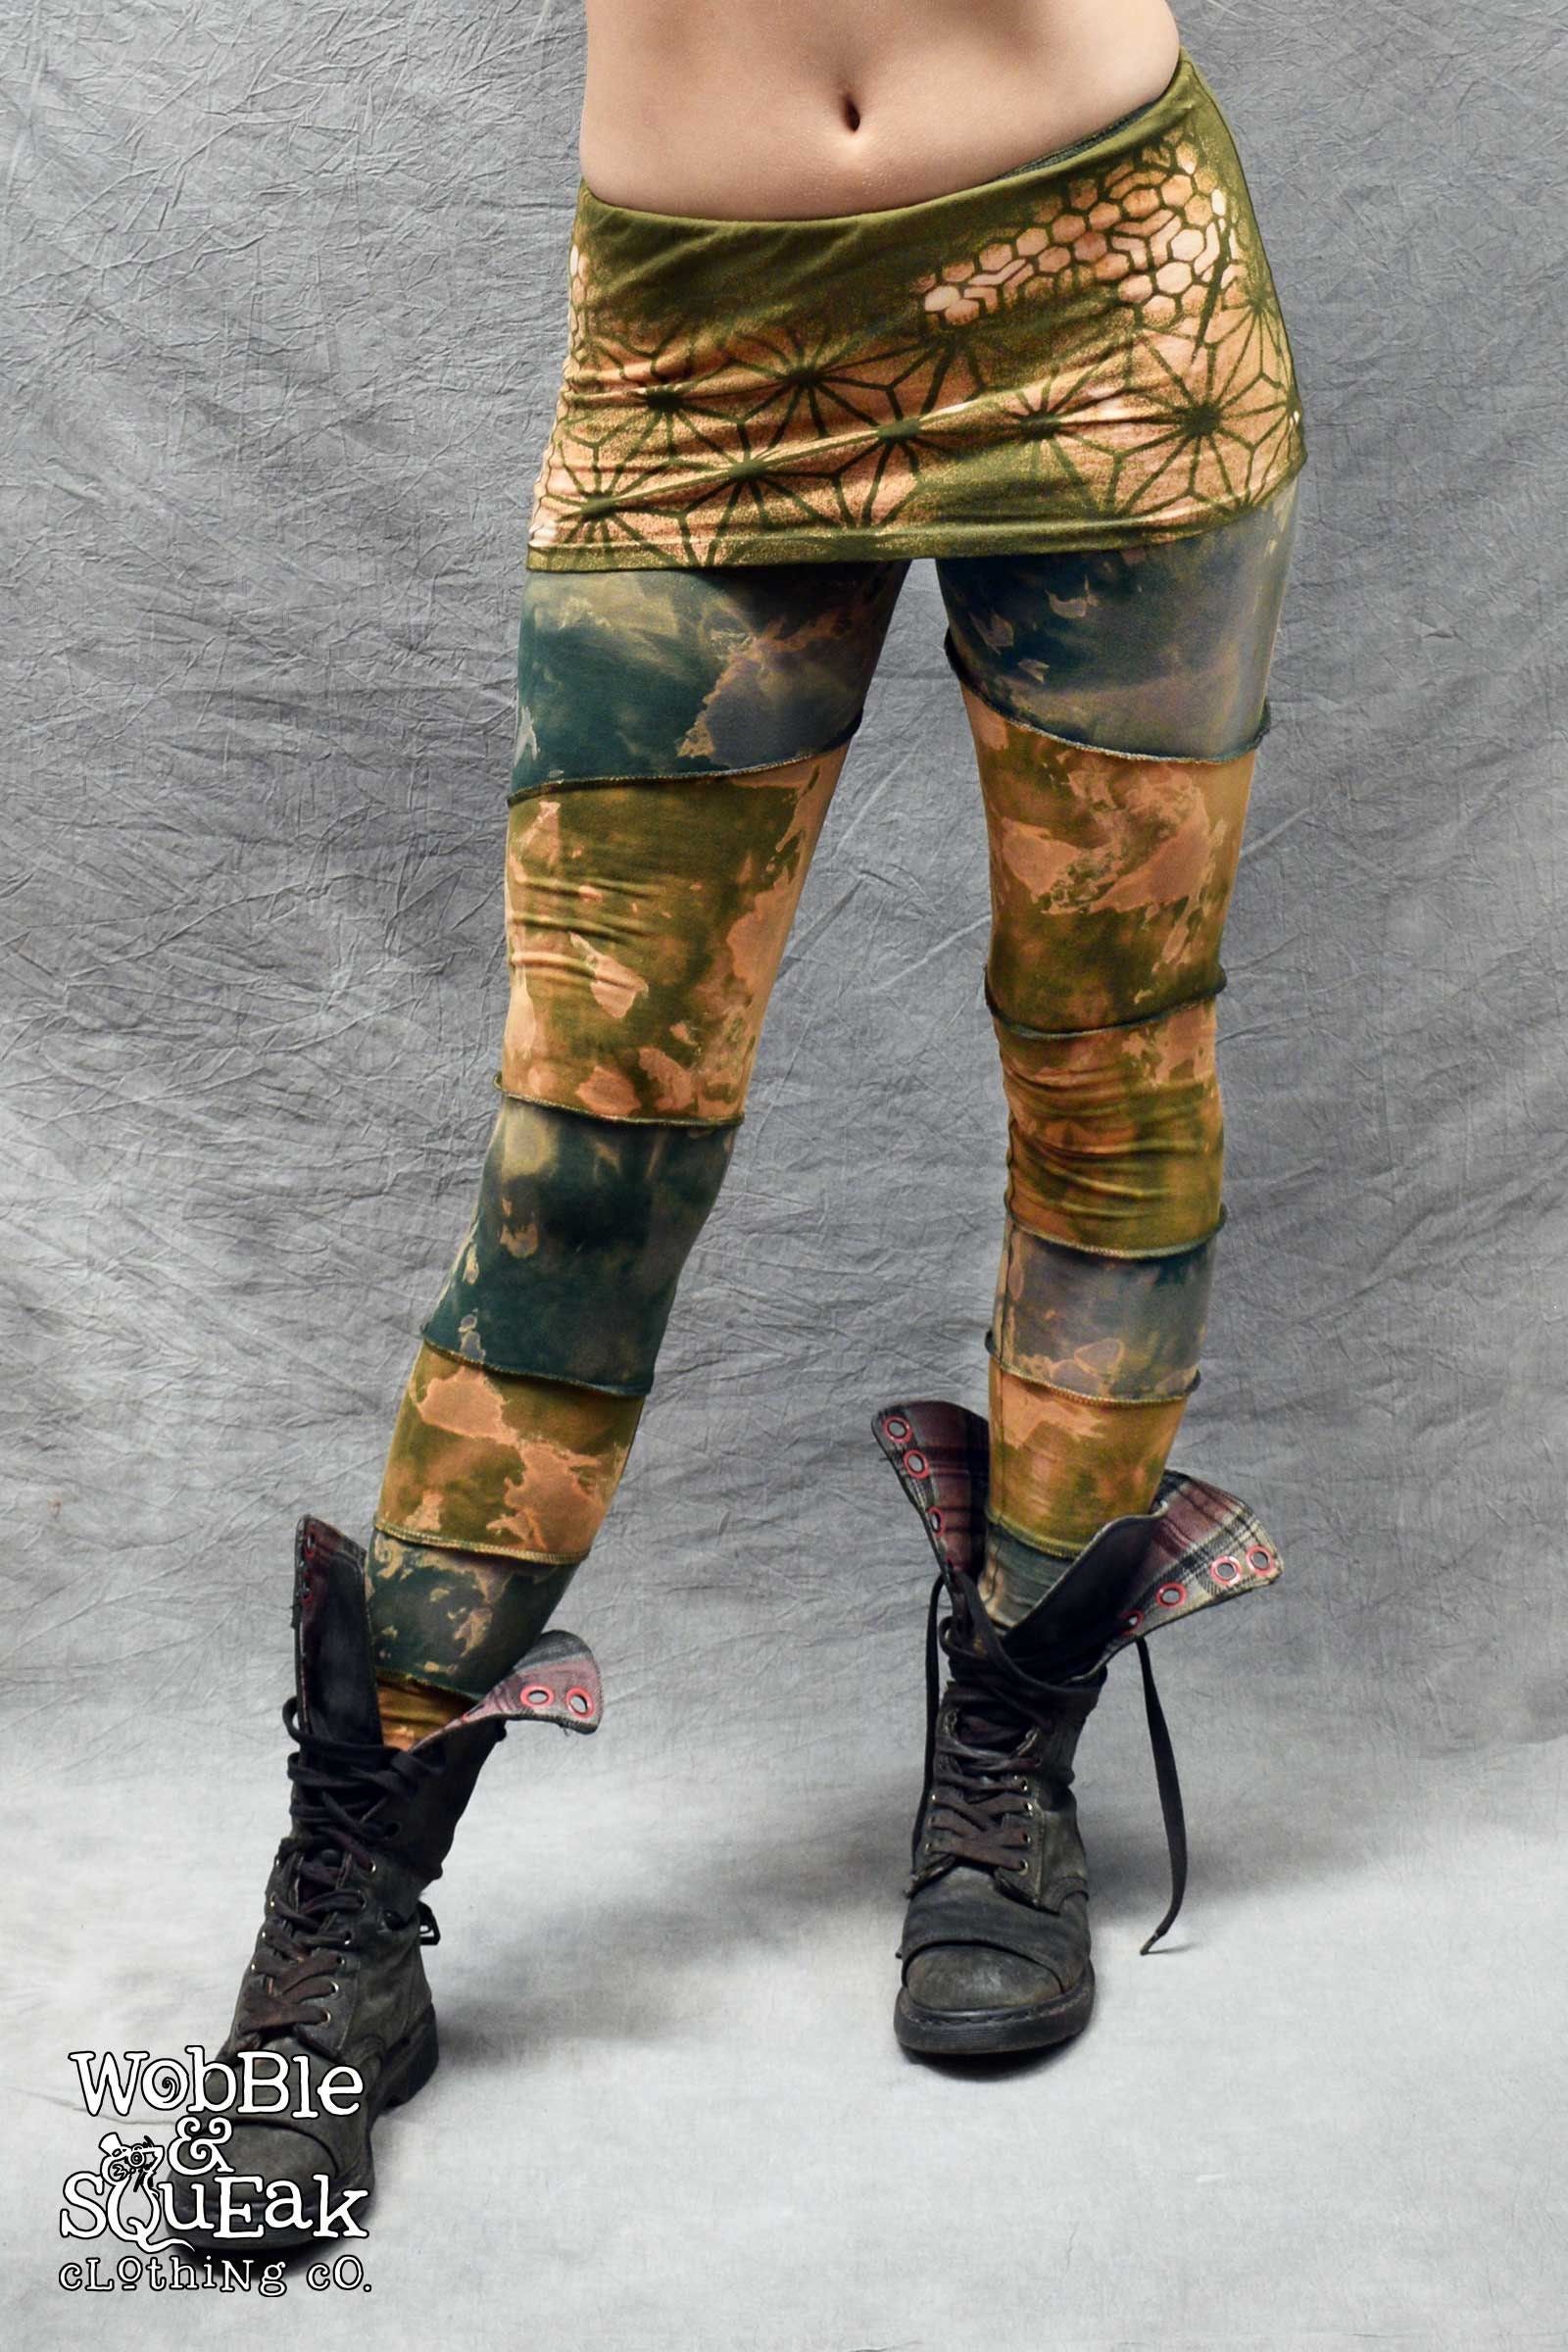 LEGGINGS with an abstract floral Pattern - Batik, Tie-Dye - unisex -  green-olive green